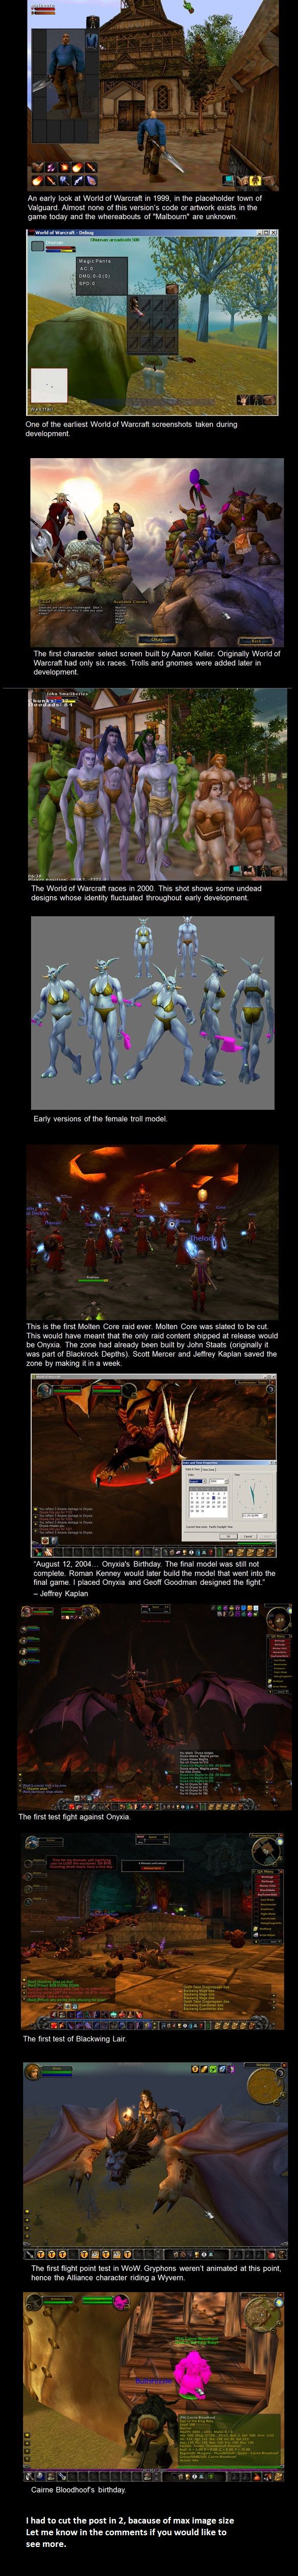 Early days of WoW